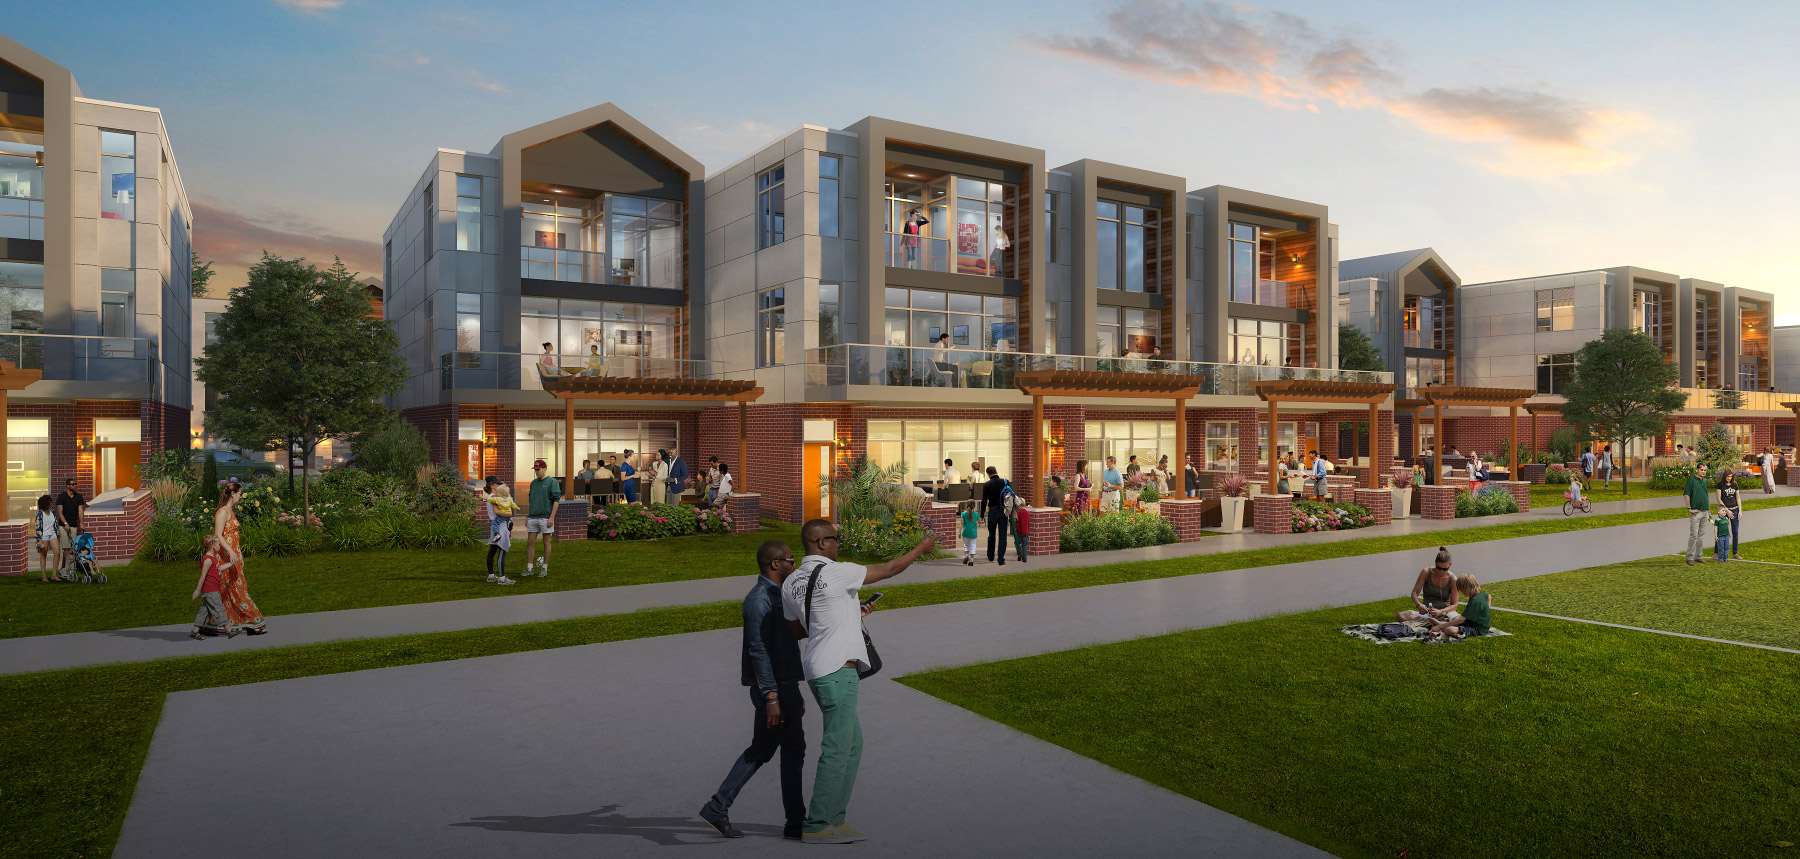 Rendering of the residences at Titletown